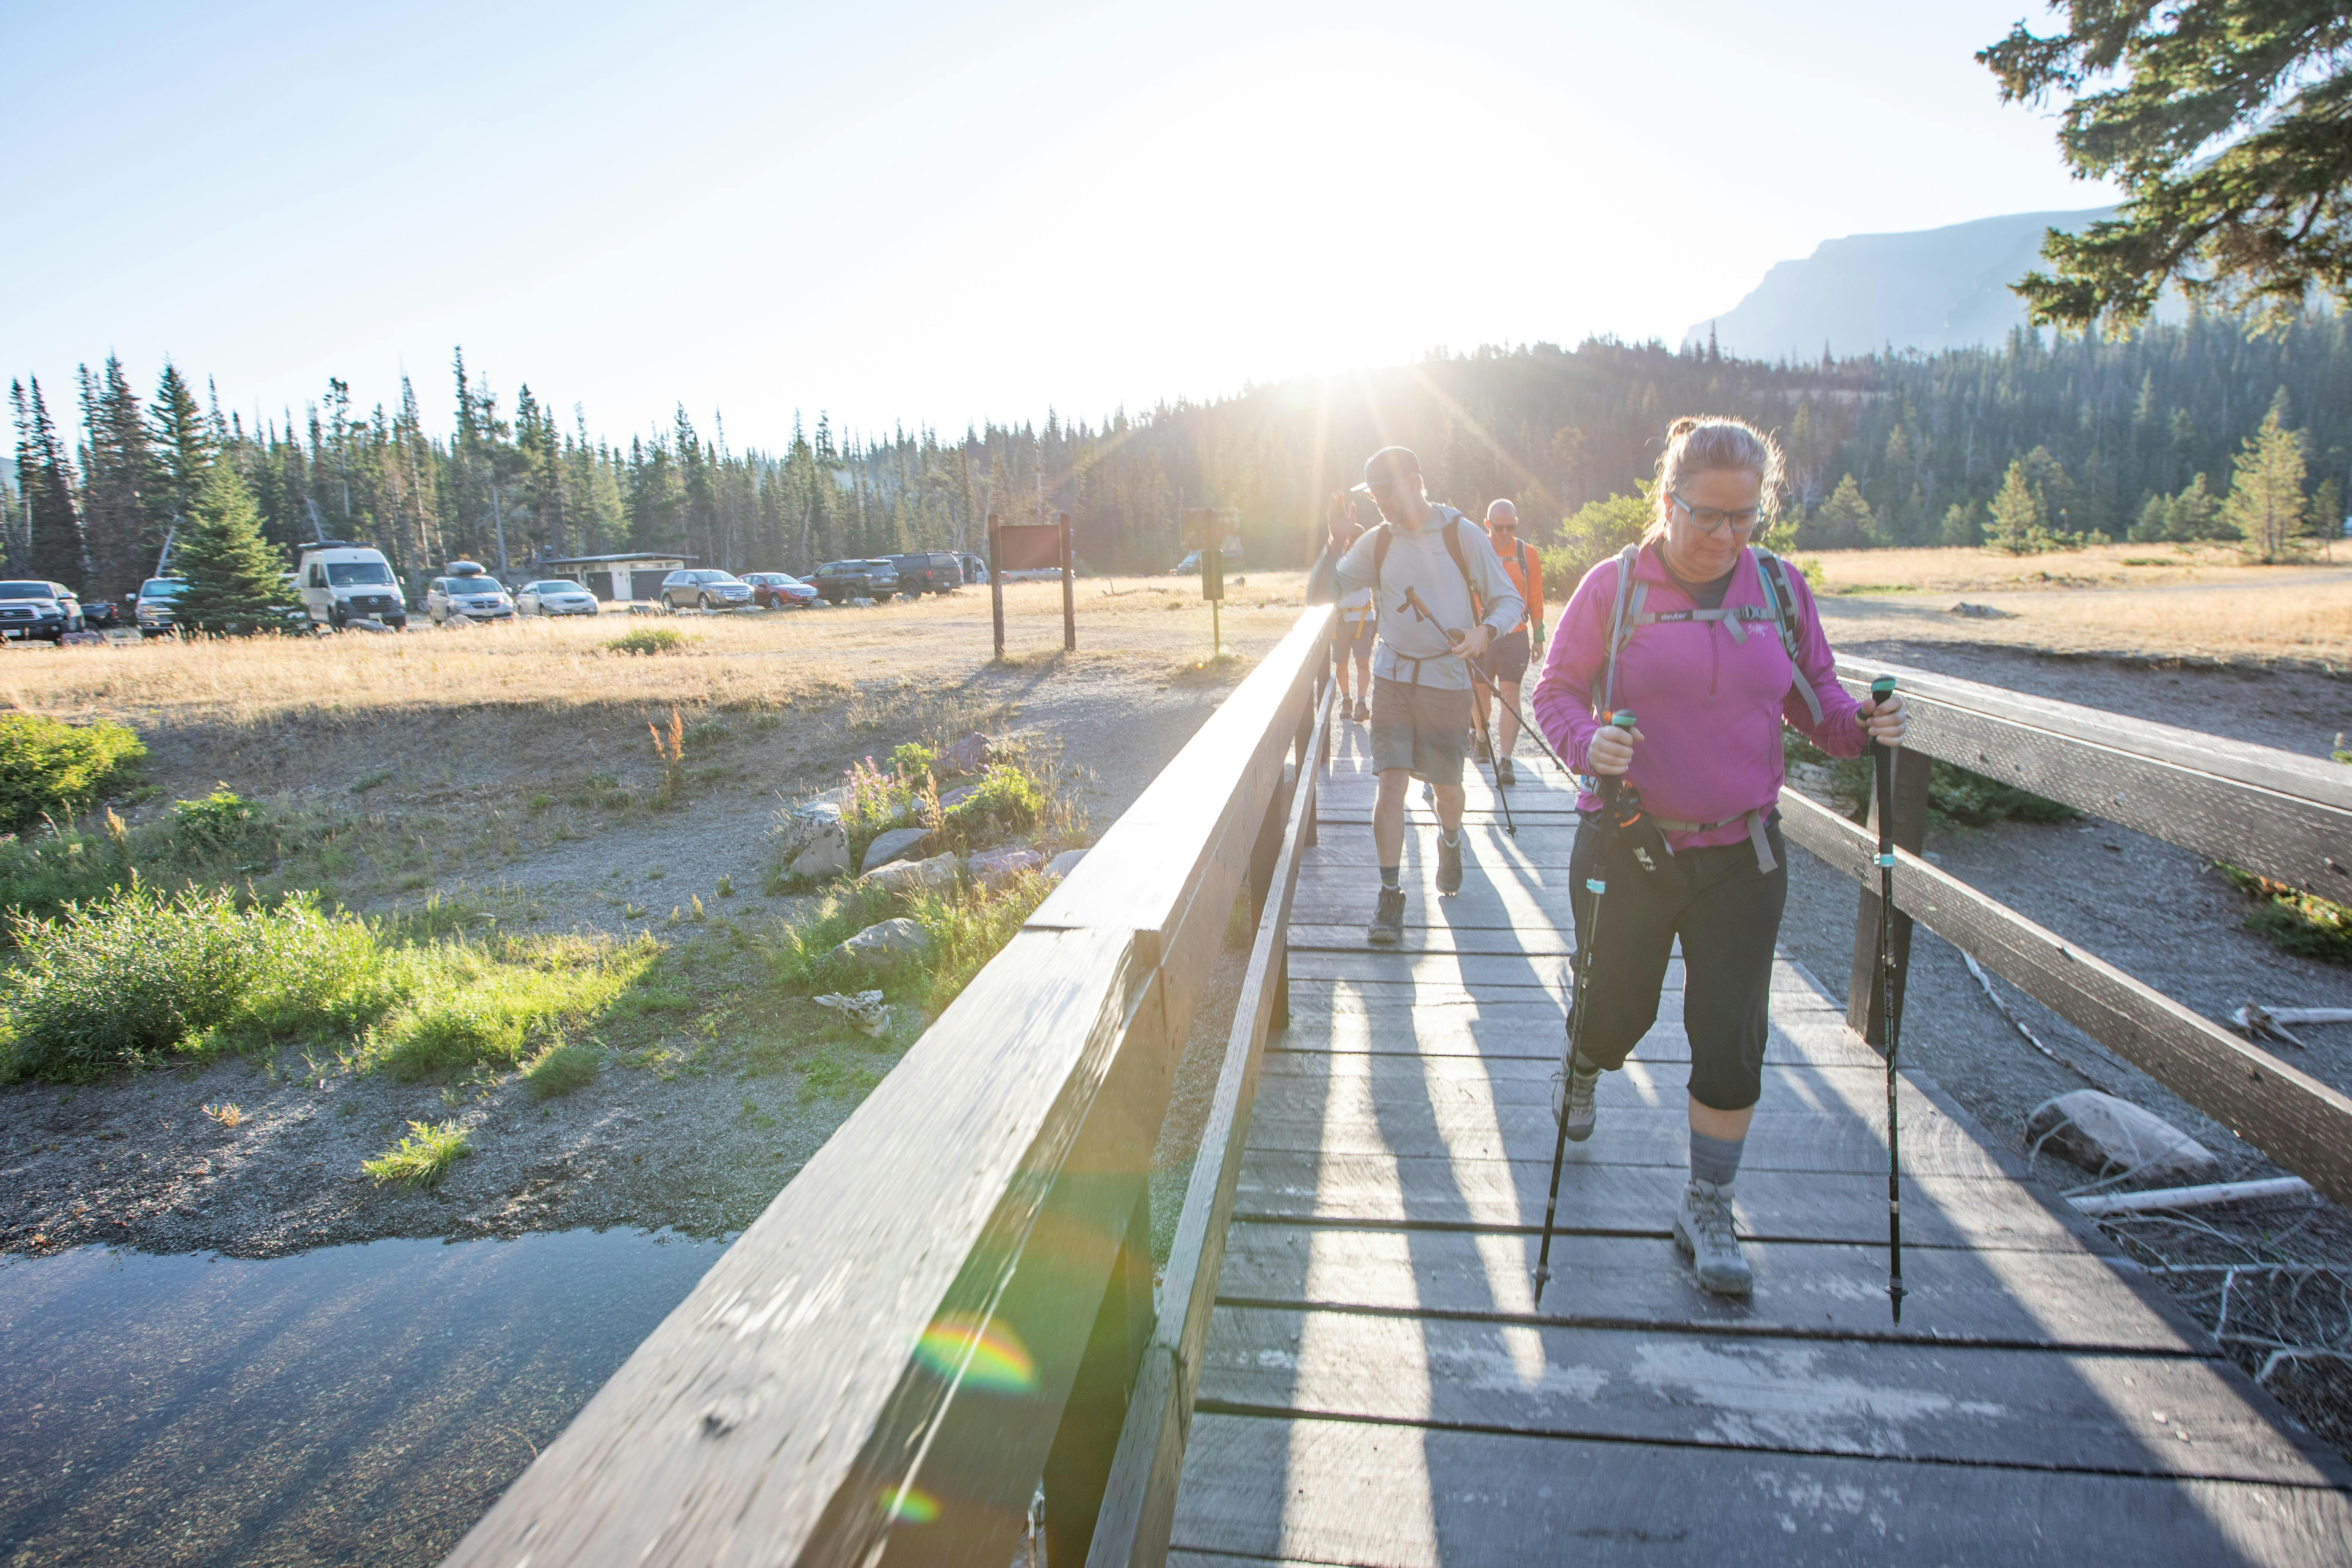 Many hikers cross a bridge at the beginning of trail wearing their Oboz hiking shoes